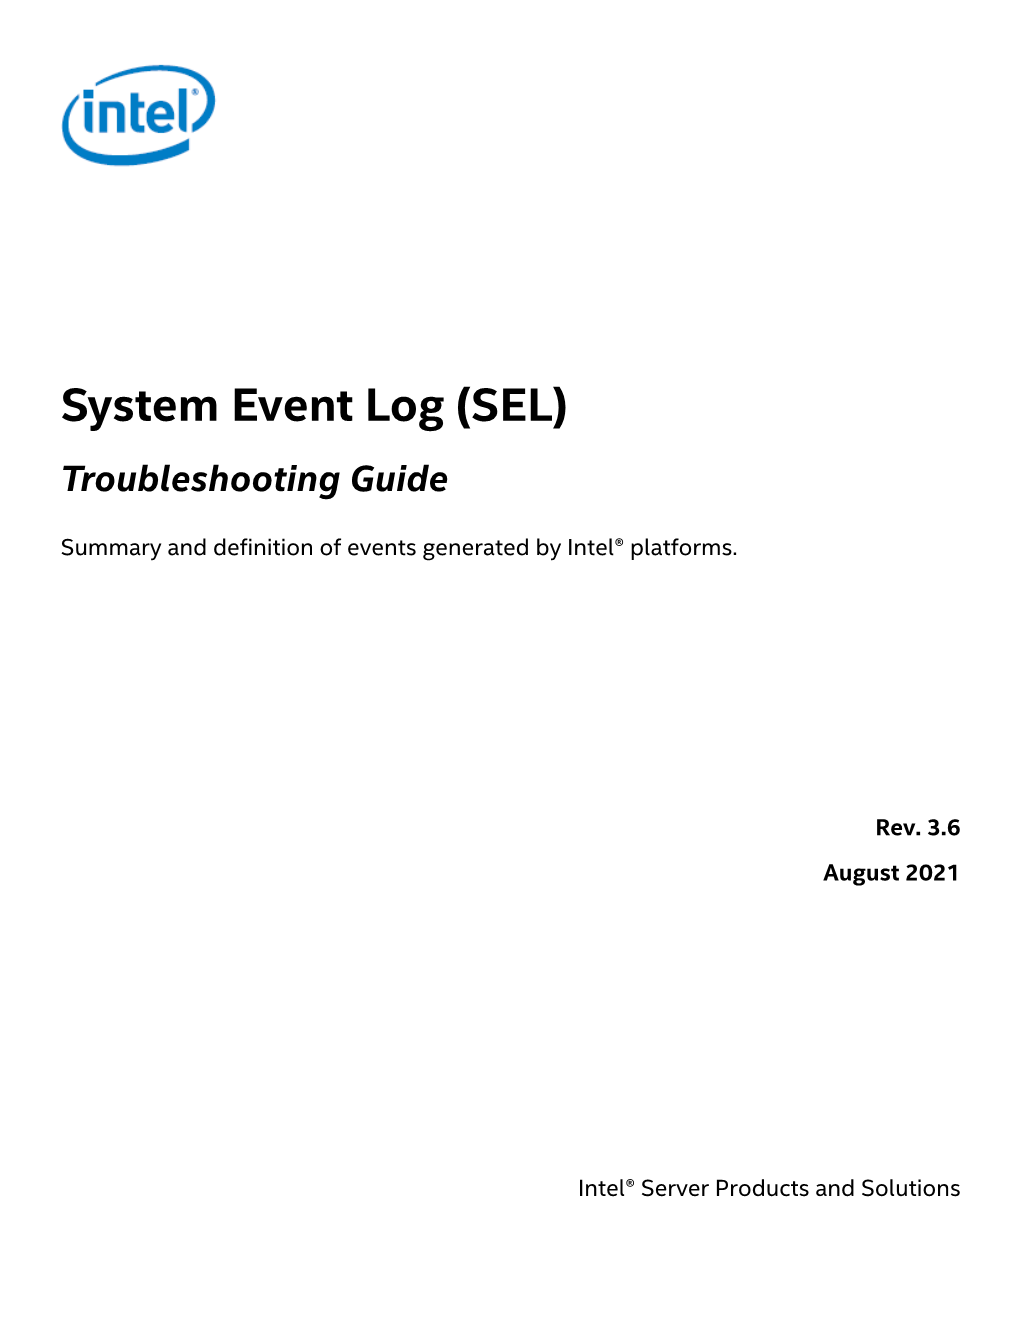 System Event Log Troubleshooting Guide